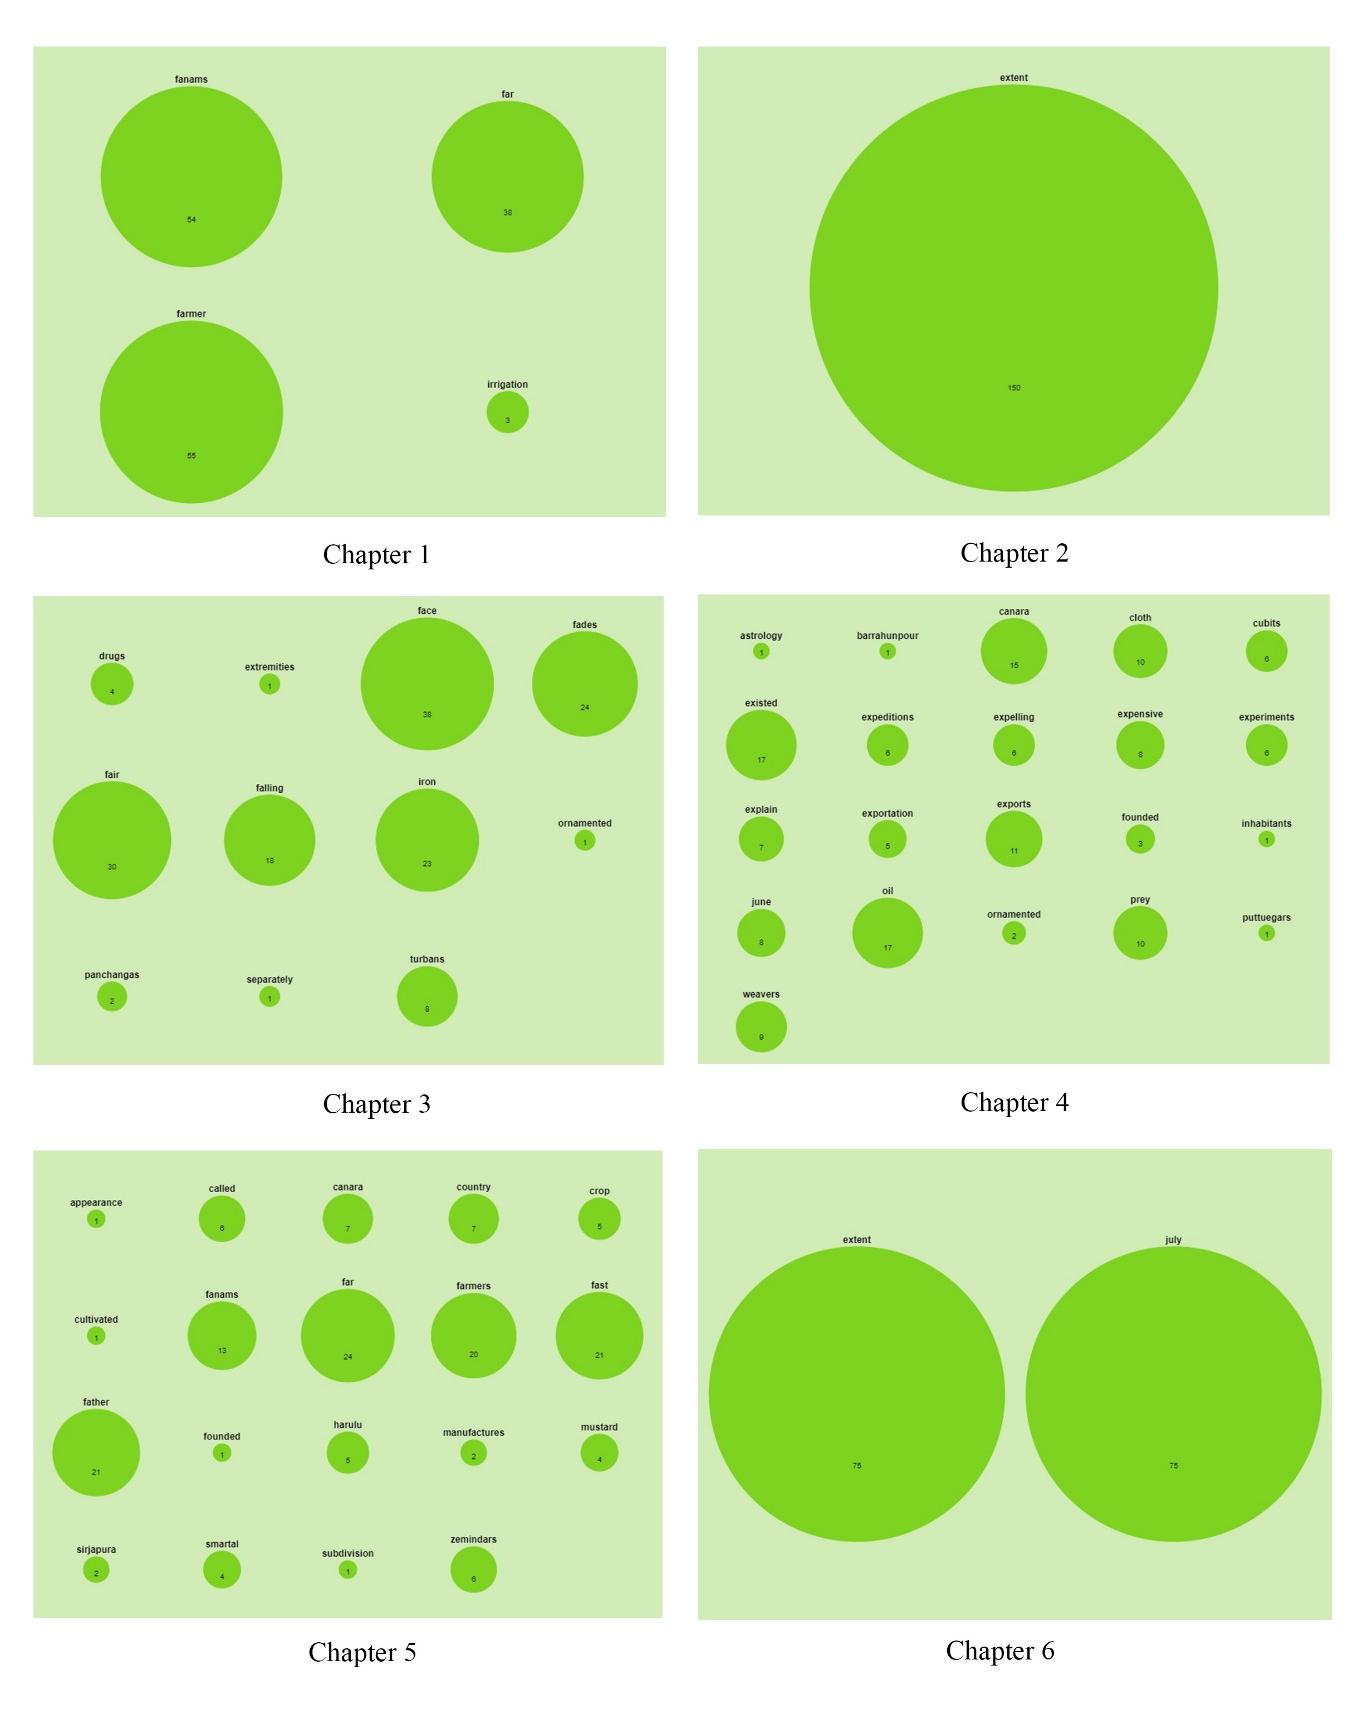 A set of scaled circle visualizations showing submodels for the six chapters of the text AJMMCM.